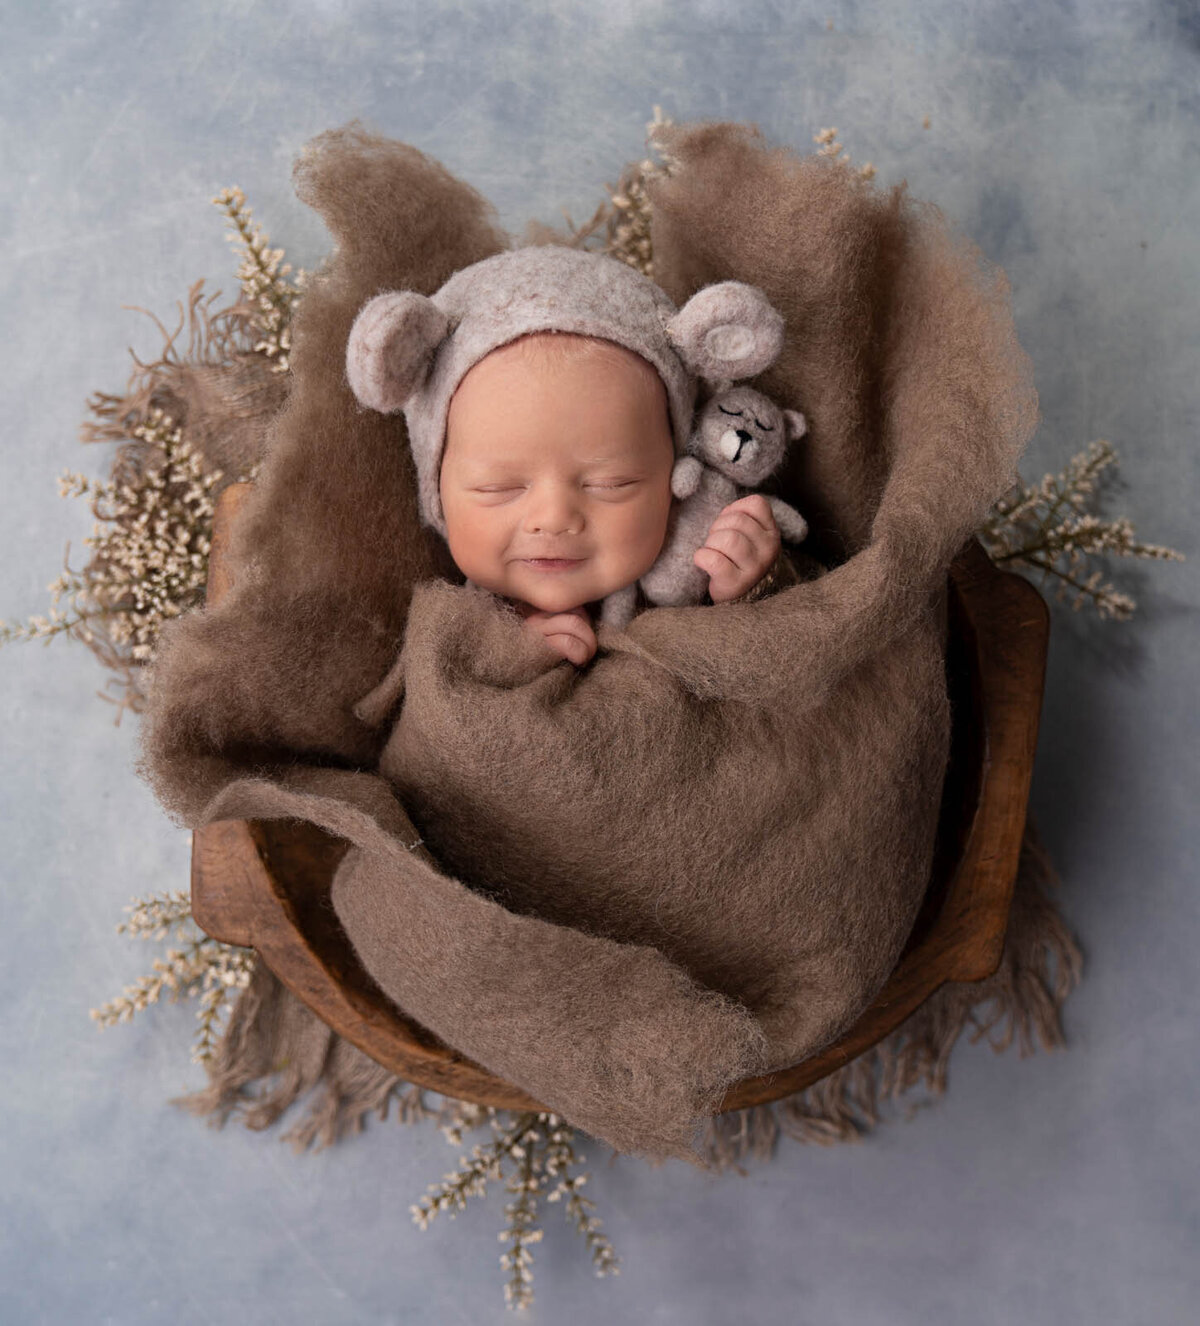 Newborn in brown blanket with stuffed animal bear smiling and sleeping